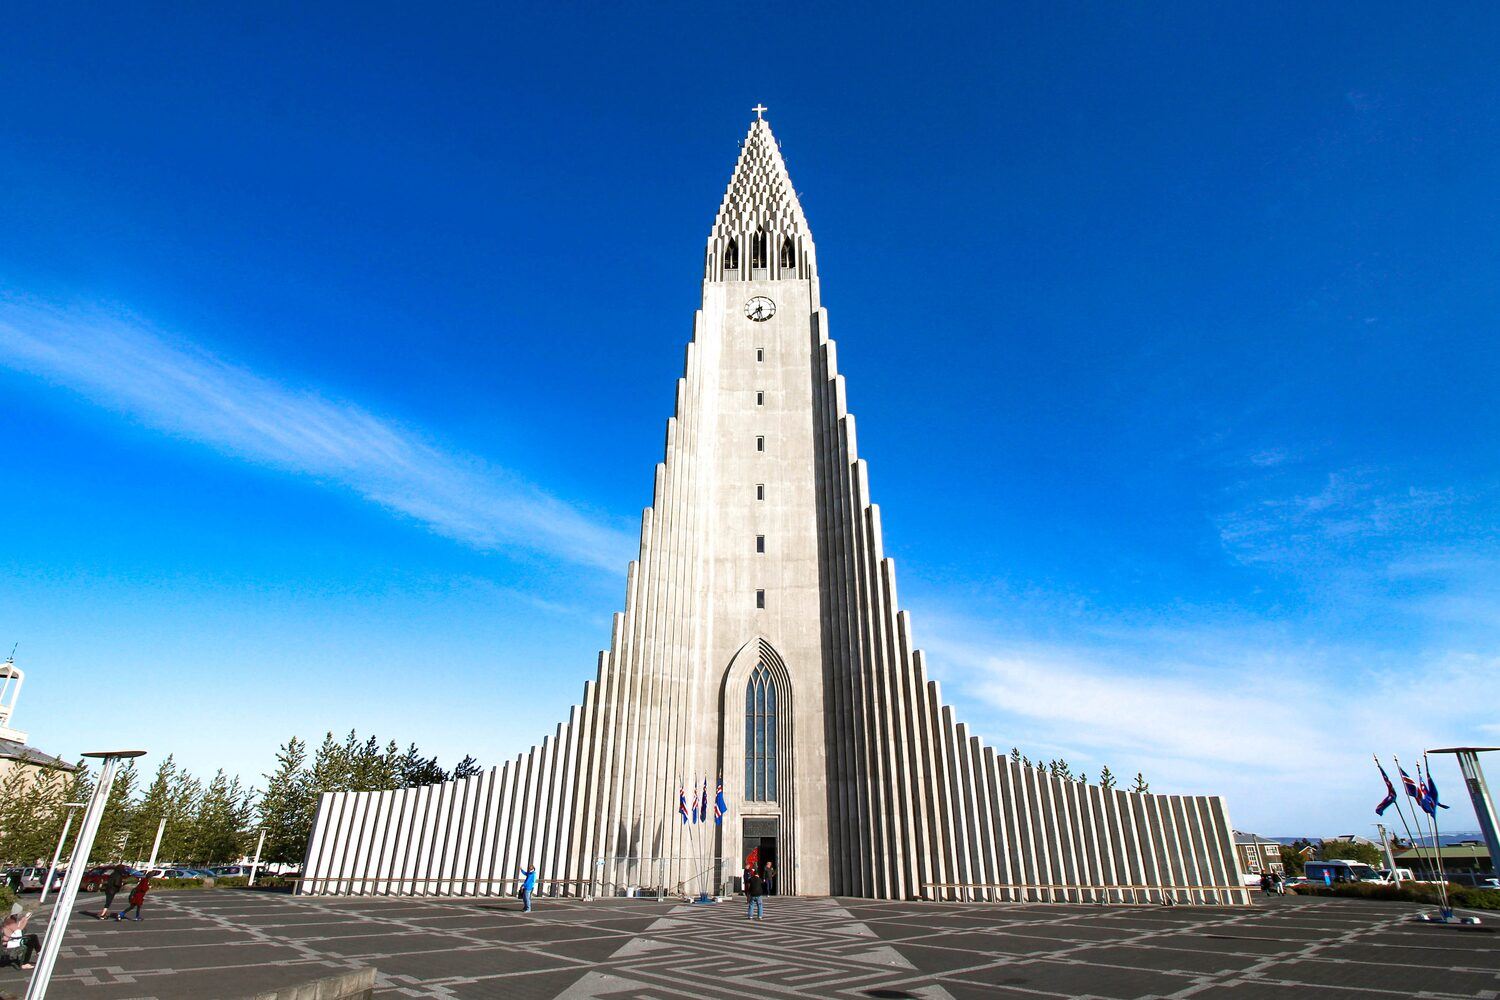 Reykjavik church in Iceland in front view, with bright blue sky in background.